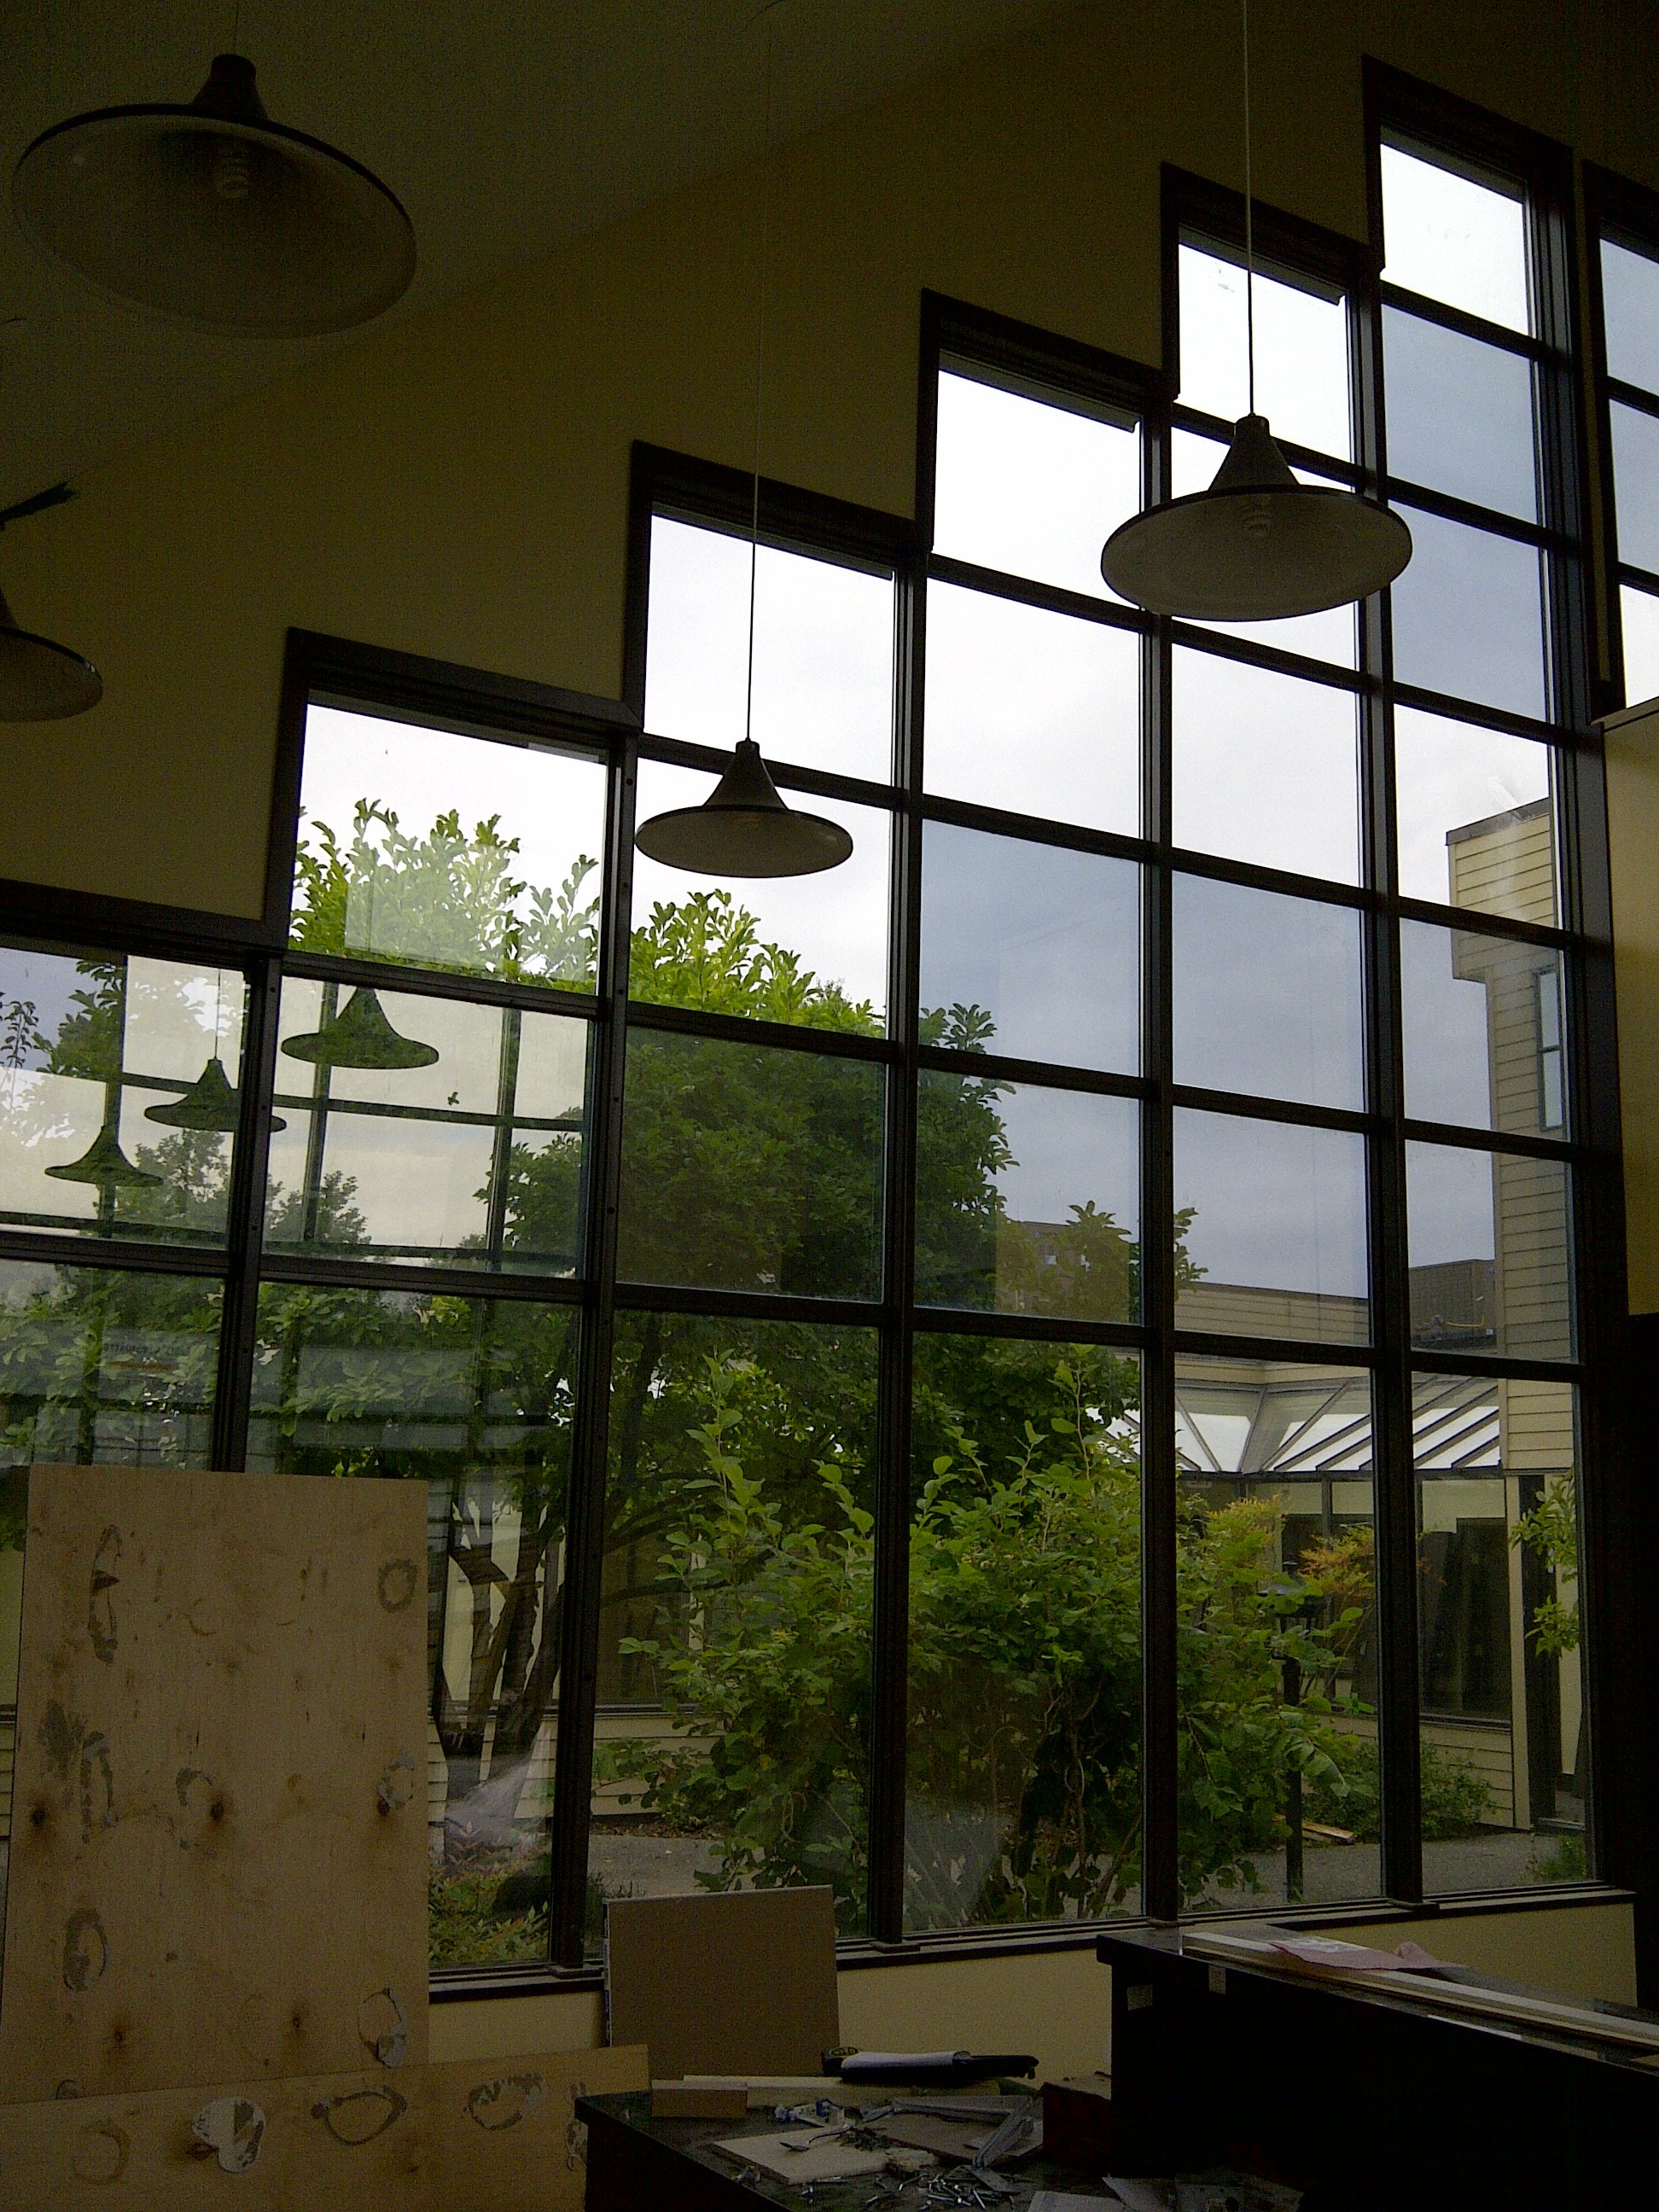 replaced commercial building foggy glass windows with brand new double paned glass windows